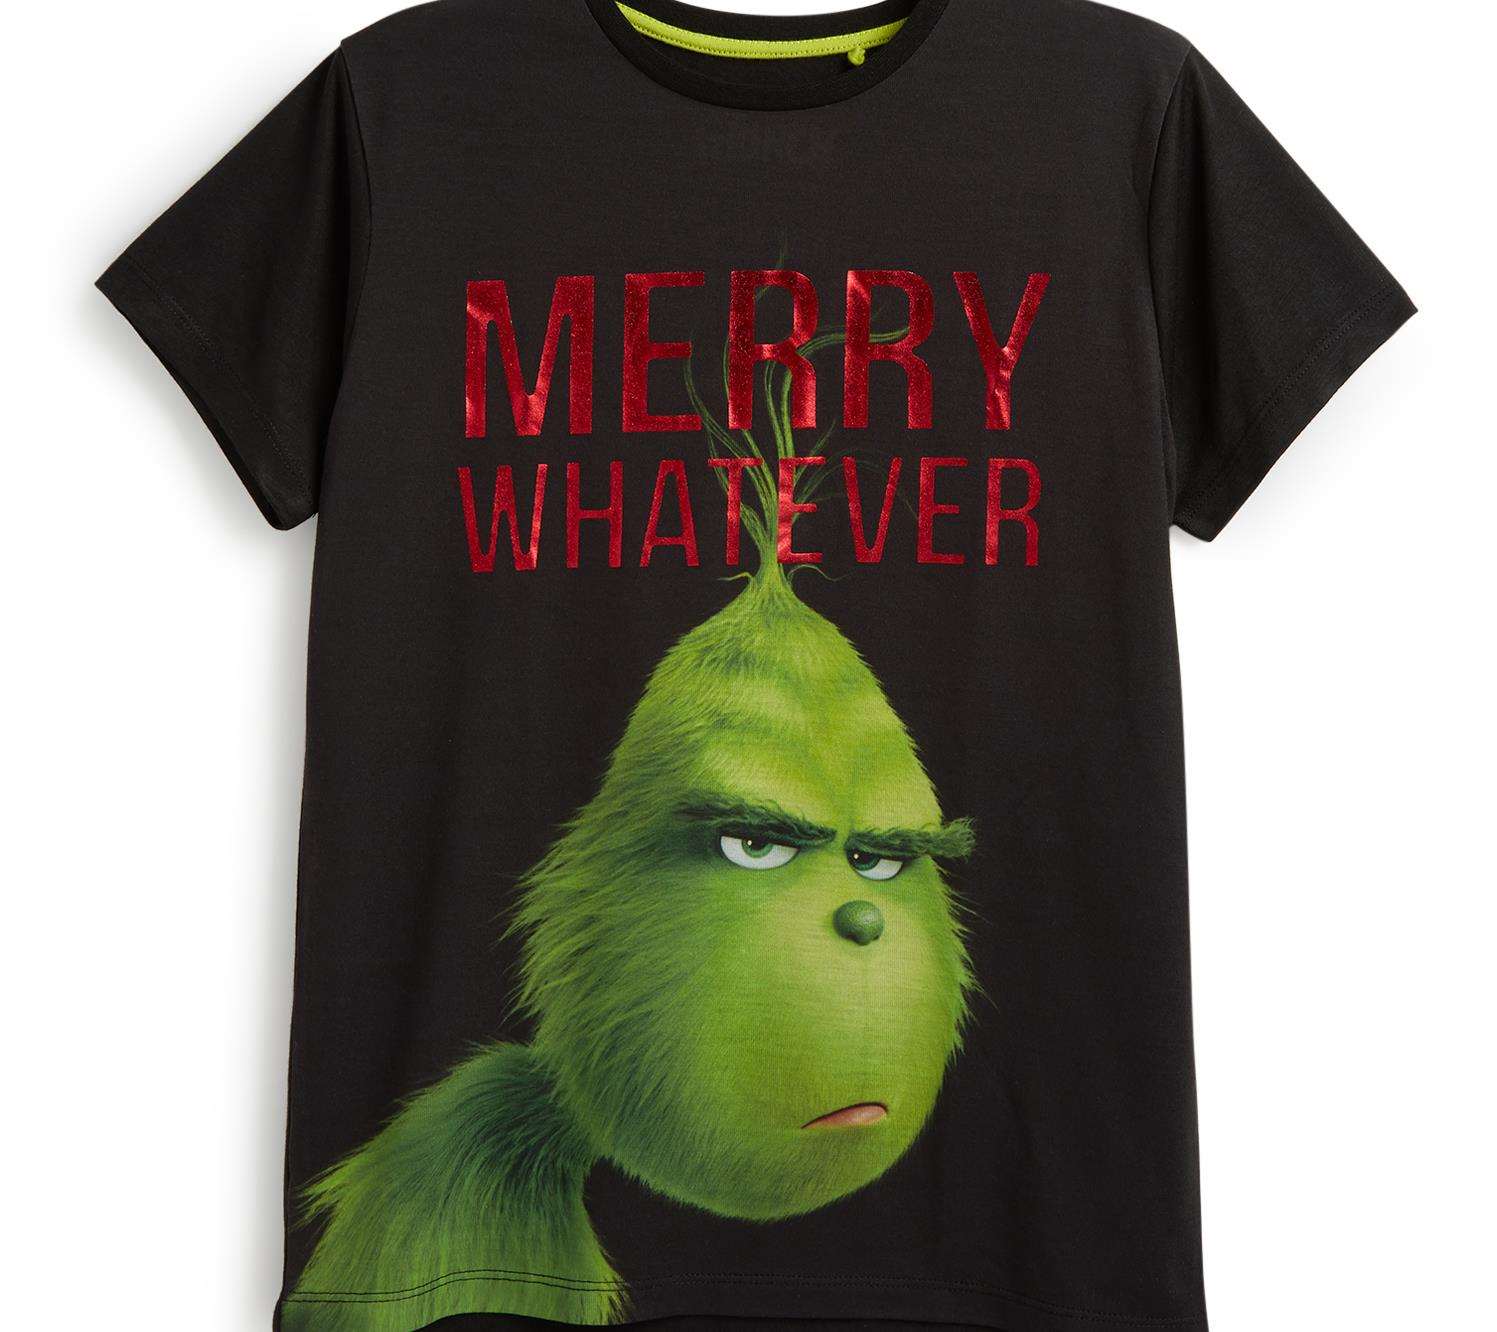 Wish someone a Merry Whatever - kids t-shirt £5 from Primark